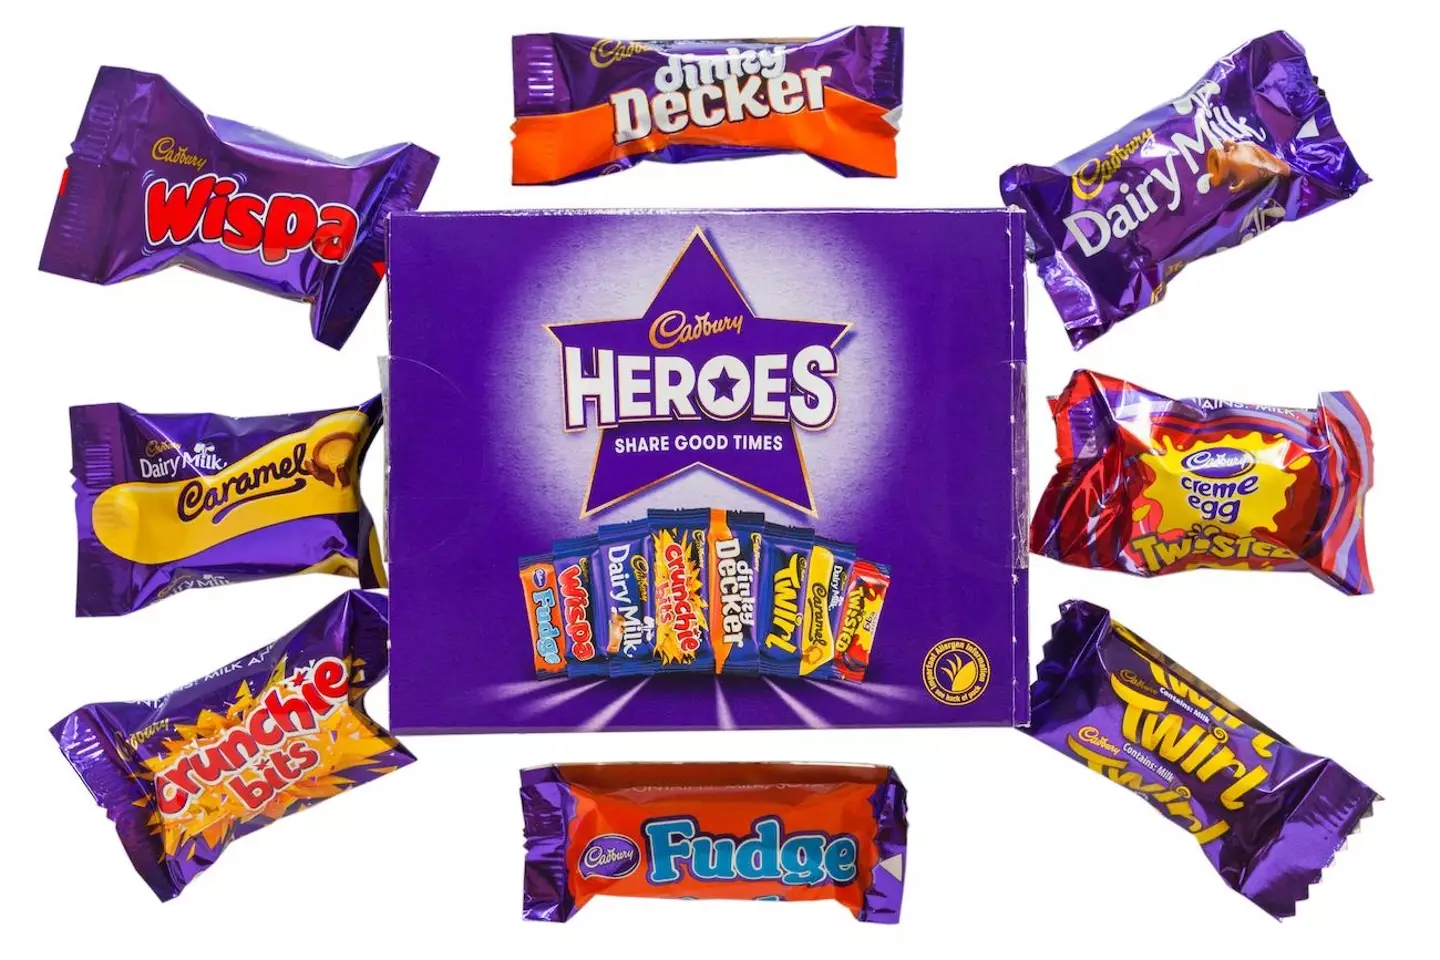 Heroes boxes typically include some of the nations favourite sweets - Dairy Milk, Dairy Milk Caramel, Twirl, Wispa, Eclaire, Dinky Decker, Crunchie, Fudge and Creme Egg Twisted.